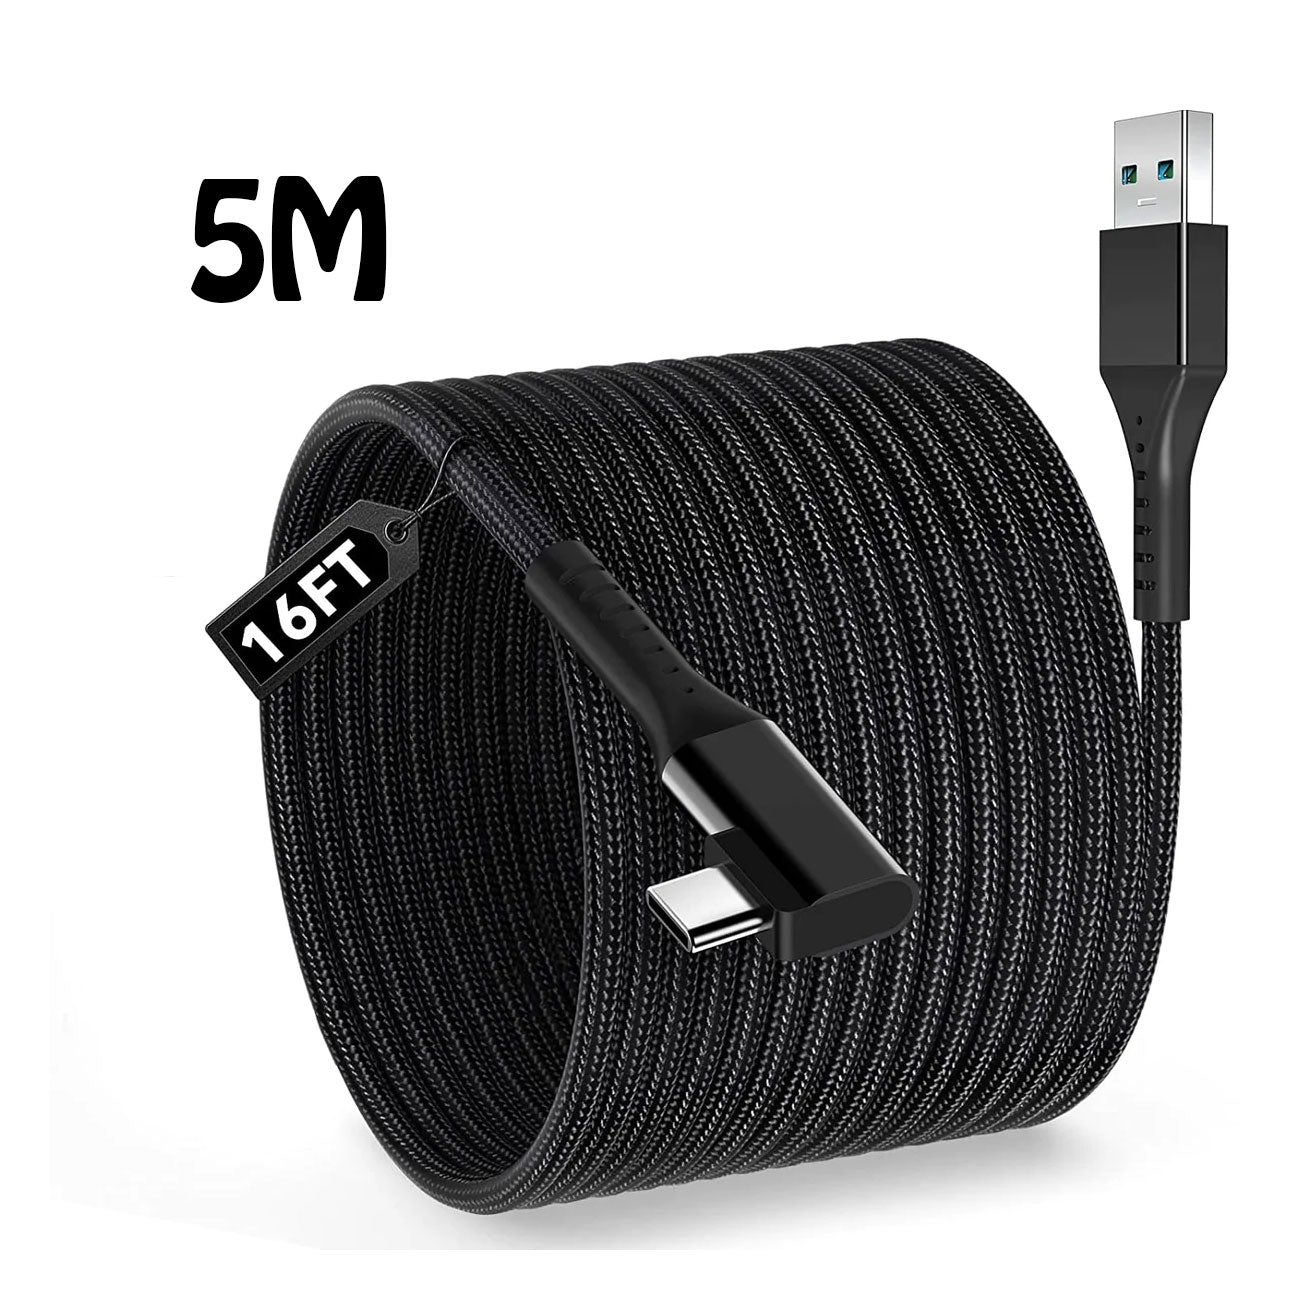 Oculus Quest 2 Type-A to C Link Cable (5M, L Design)